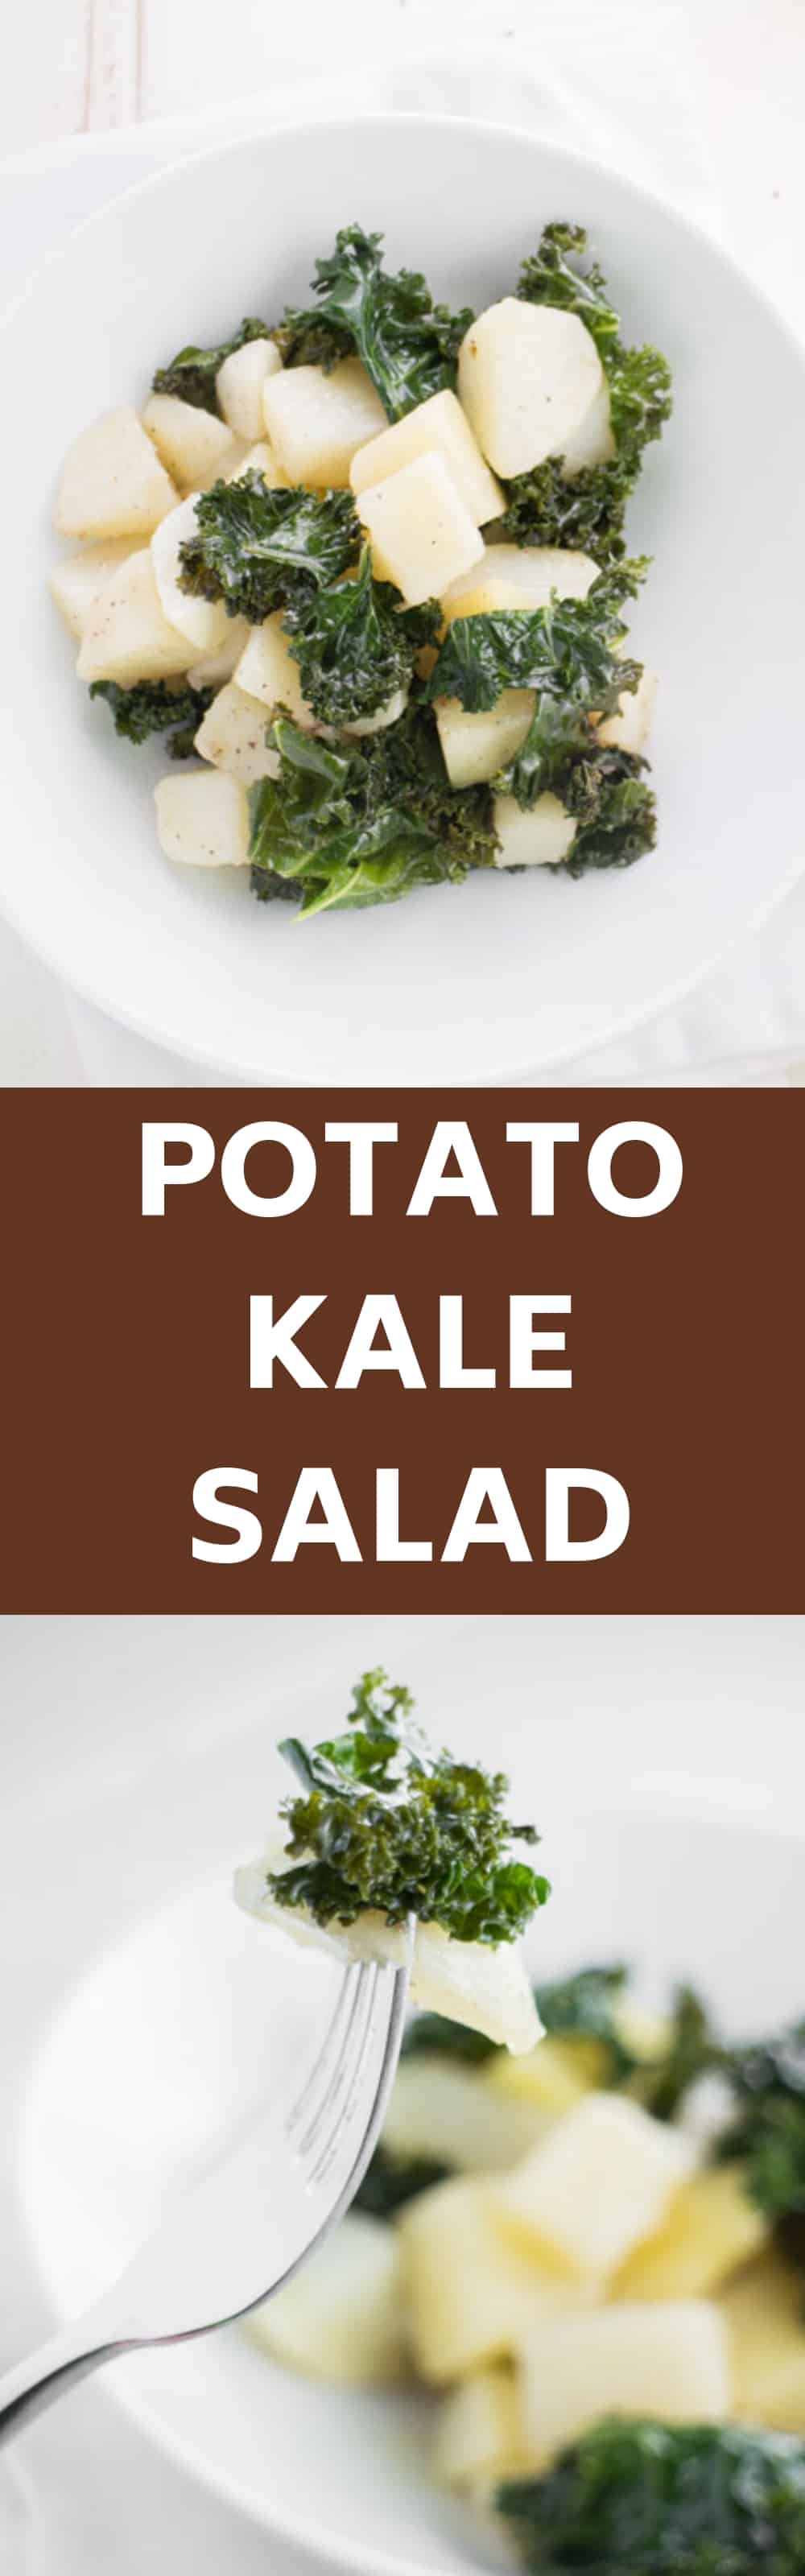 This easy recipe for Simple Potato Kale Salad is one of my favorite healthy meals or side dishes. The ingredients are straightforward: potatoes, kale, and olive oil – that’s it! Paleo, Whole30-compliant, and vegan friendly.